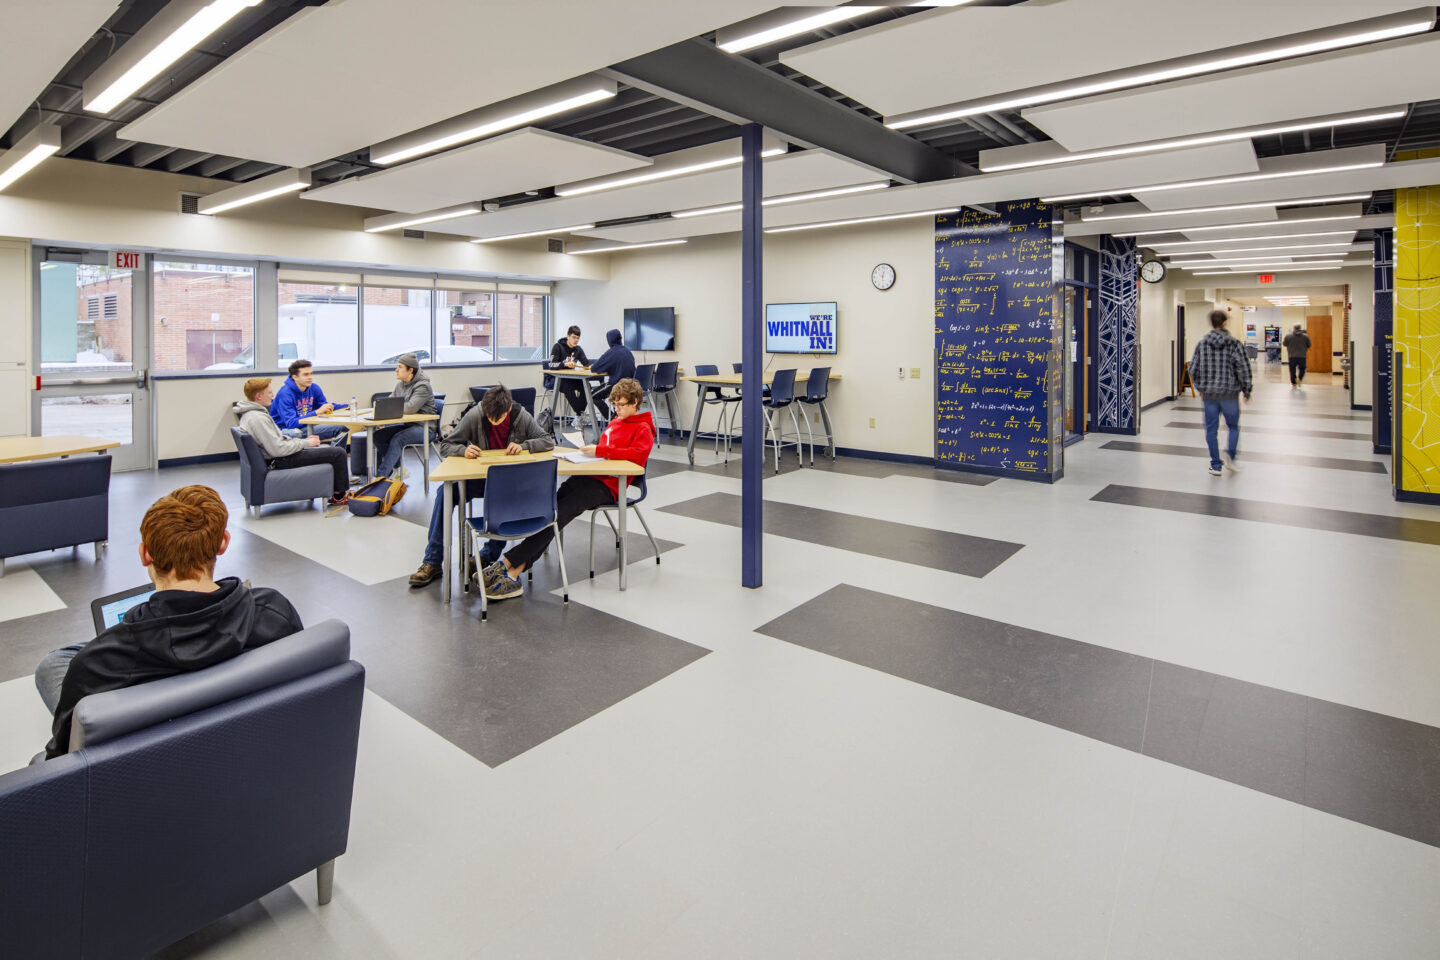 Students work at flexible furniture in a STEM commons off a hallway in Whitnall High School